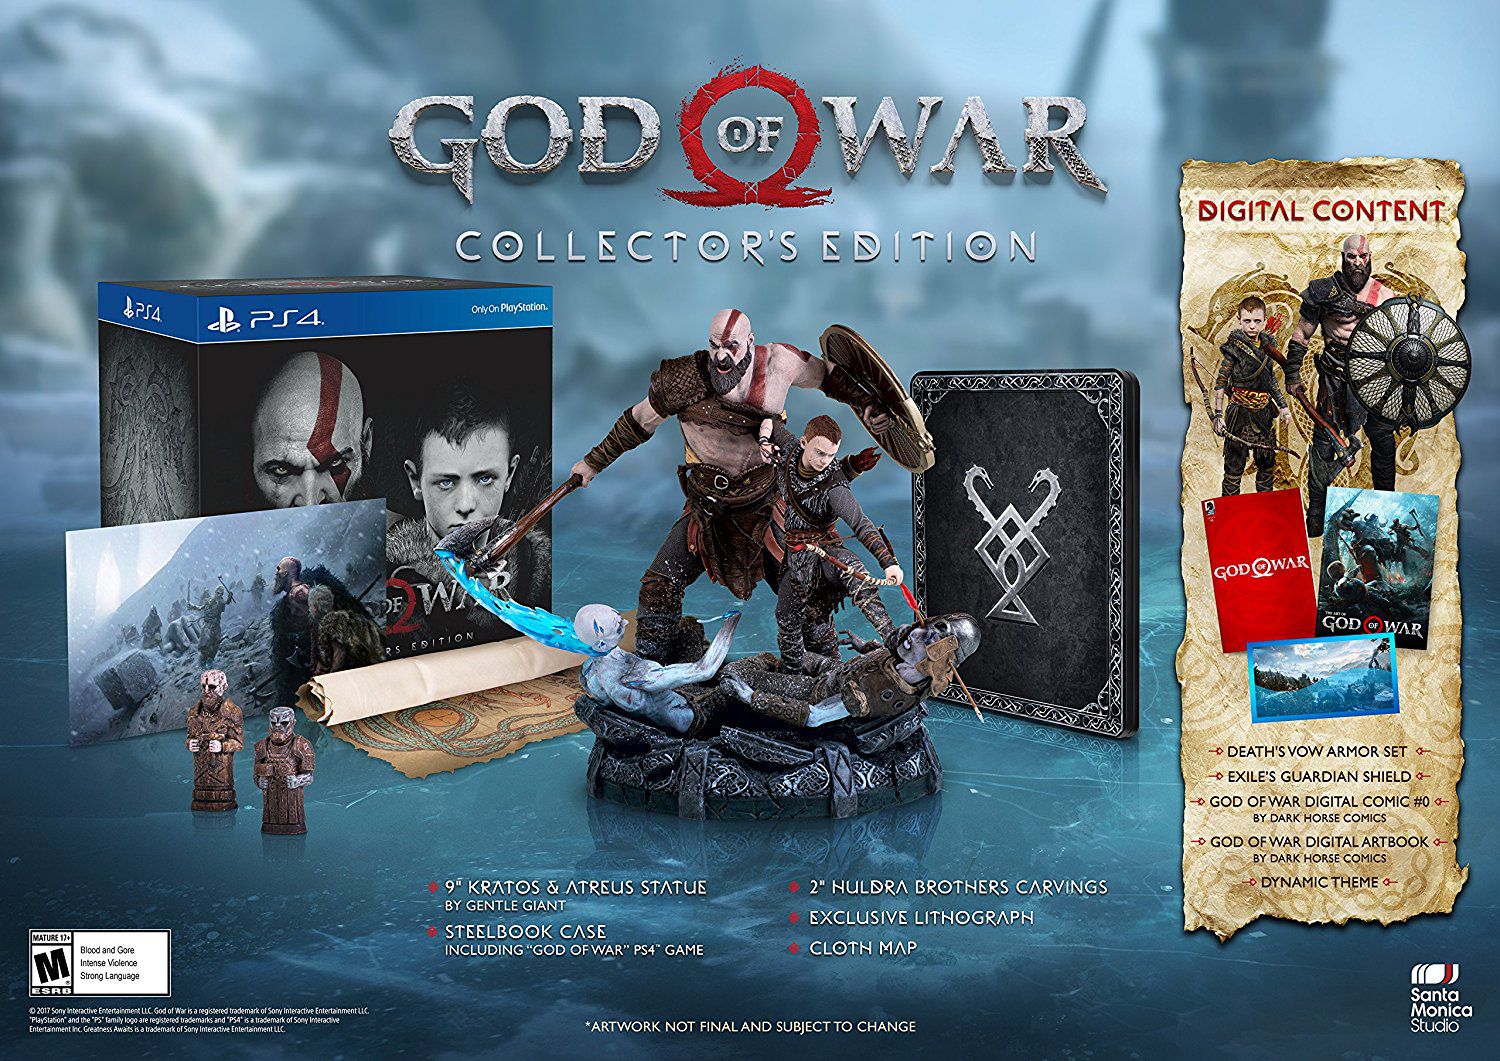 Novos JOGOS PS PLUS EXTRA DELUXE! God Of War CLASSIC Collection CADÊ?! 